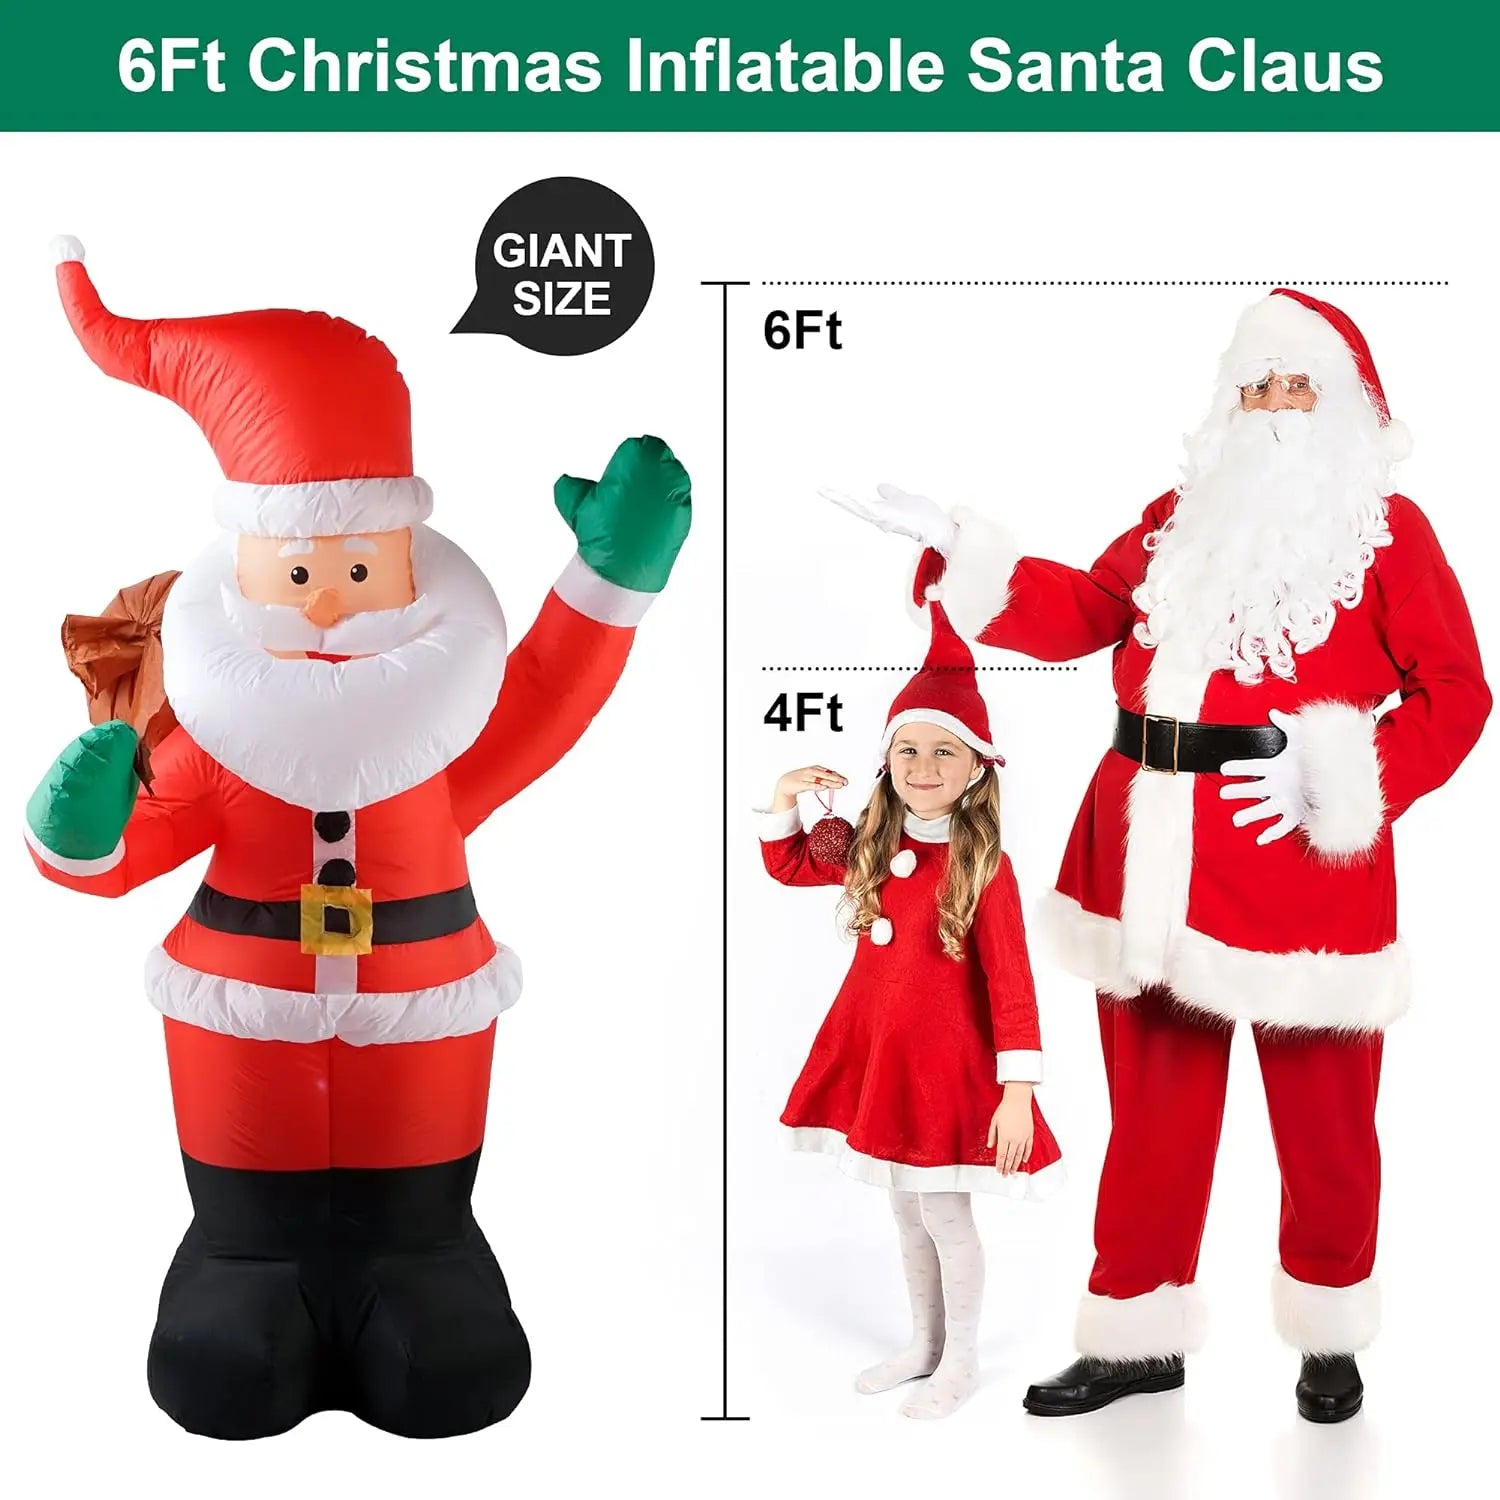 Santa Claus Inflatable Christmas Inflatables Decorations with LED Lights - Festive Blow Up Yard Decorations for Indoor and Outdoor Garden Decorations ShopOnlyDeal